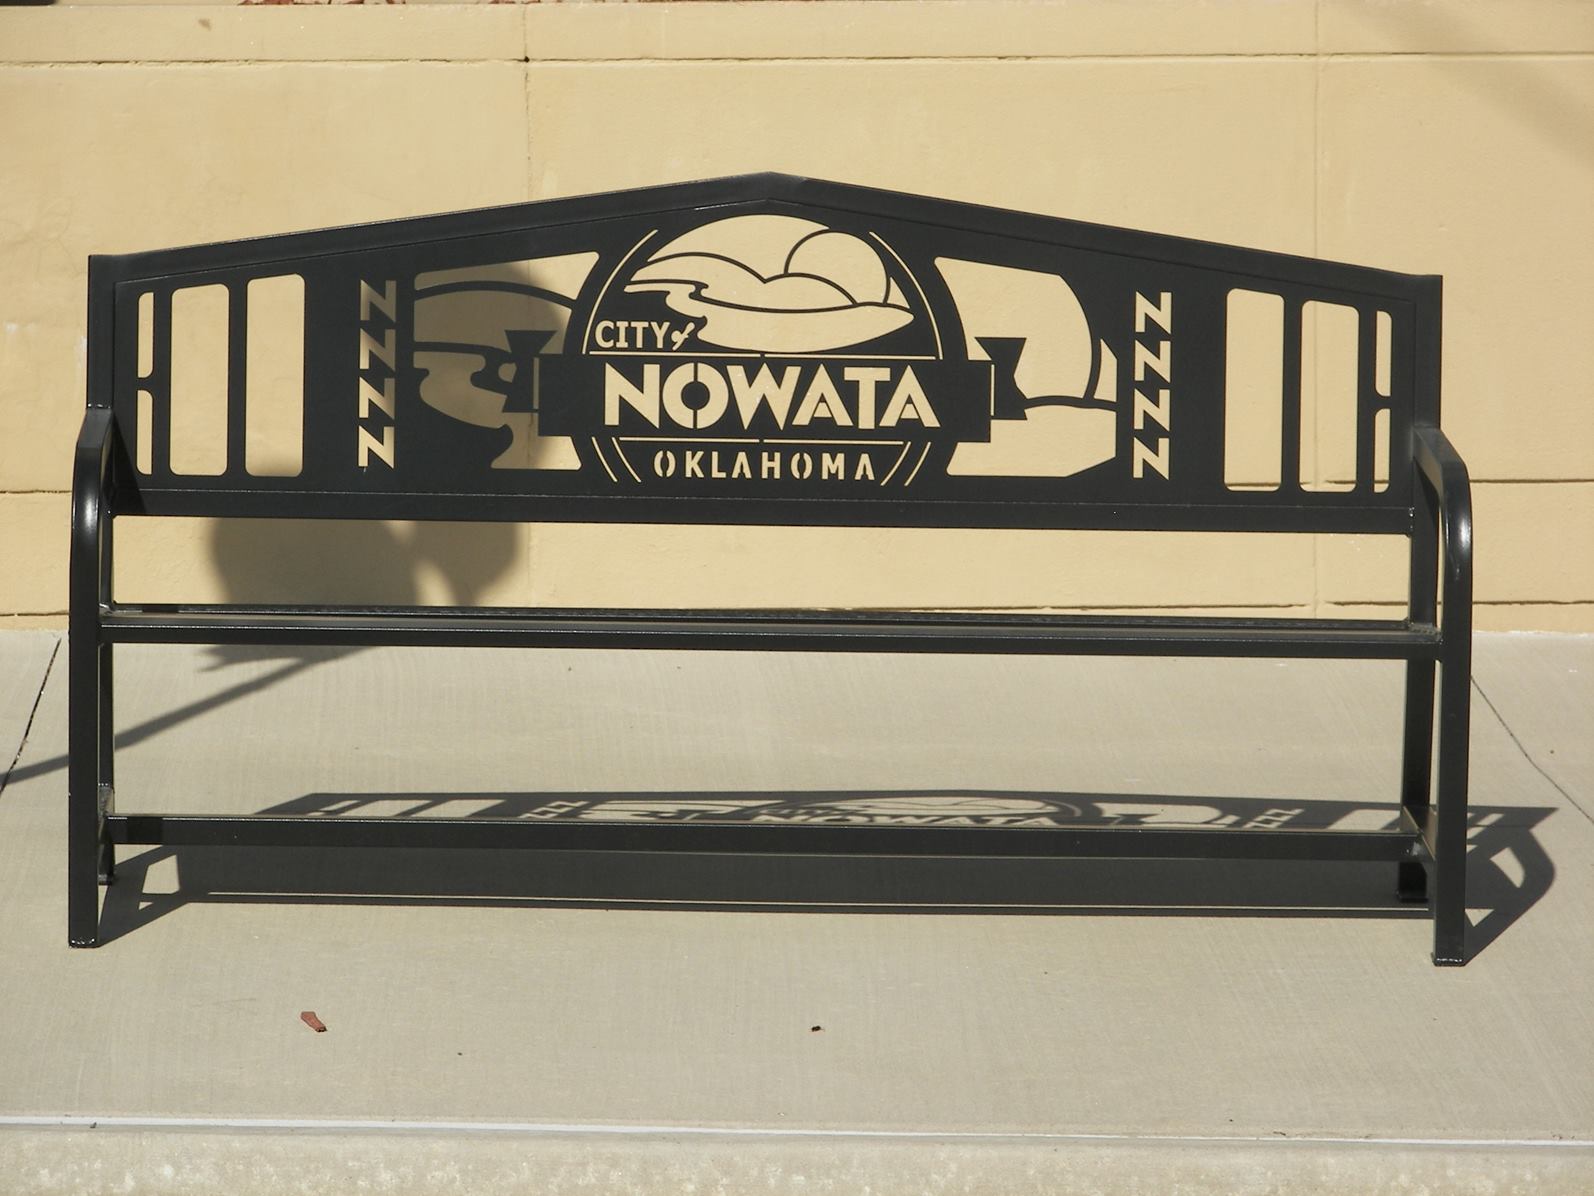 City of Nowata New Benches in Downtown Nowata